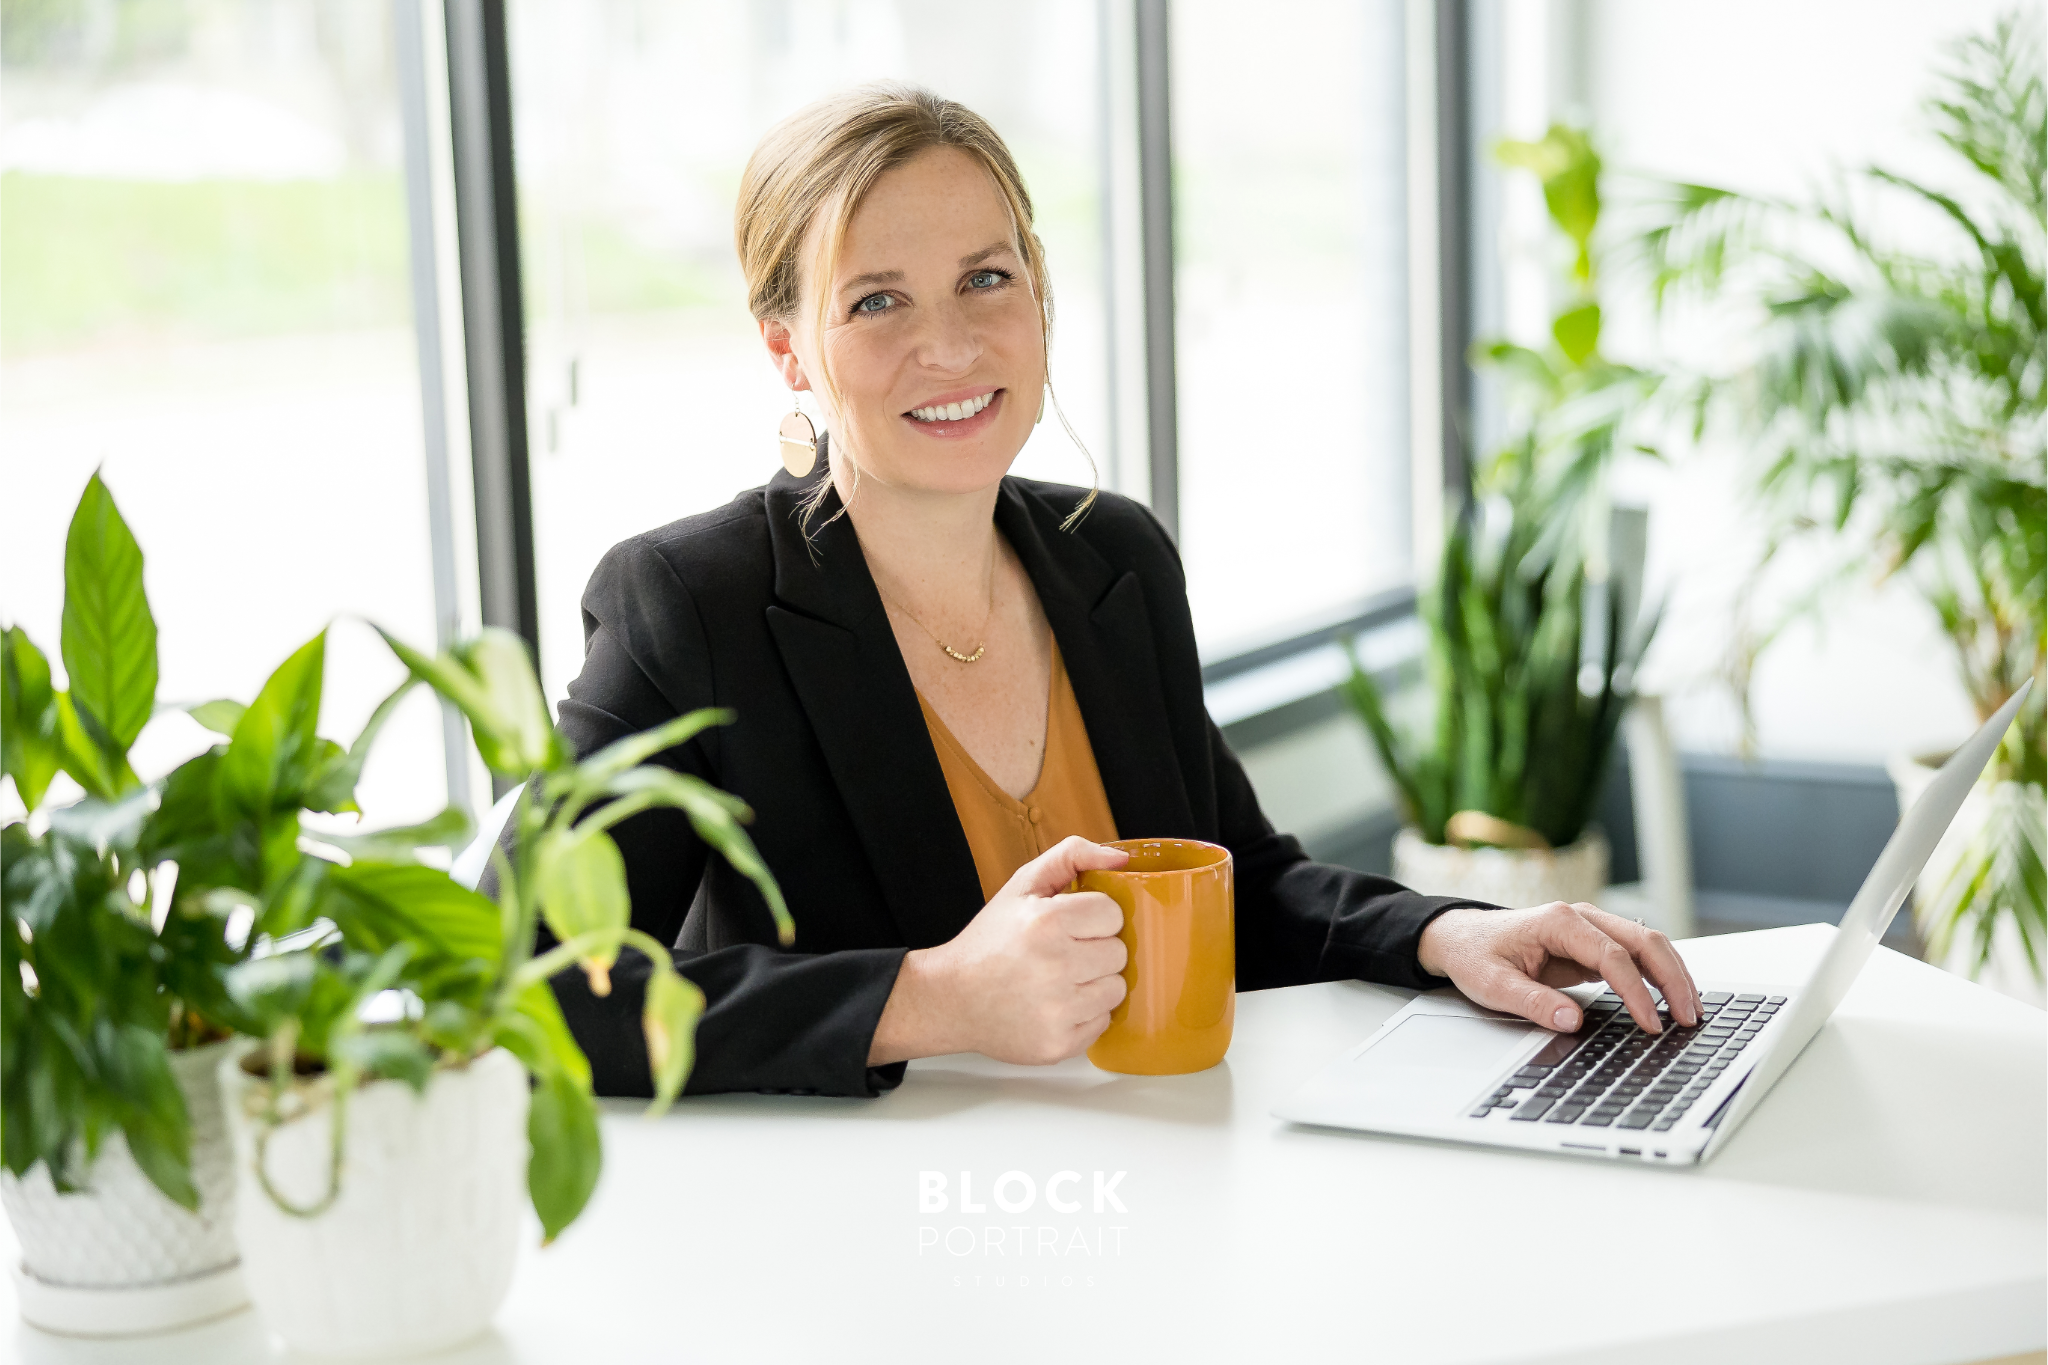 Professional portrait of caucasian woman with blonde hair and blue eyes wearing a black blazer and yellow blouse holding a yellow mug, sitting at a desk with windows behind her and two plants in the background, smiling at the camera, taken for business branding at Block Portrait Studios in Saint Paul, MN.